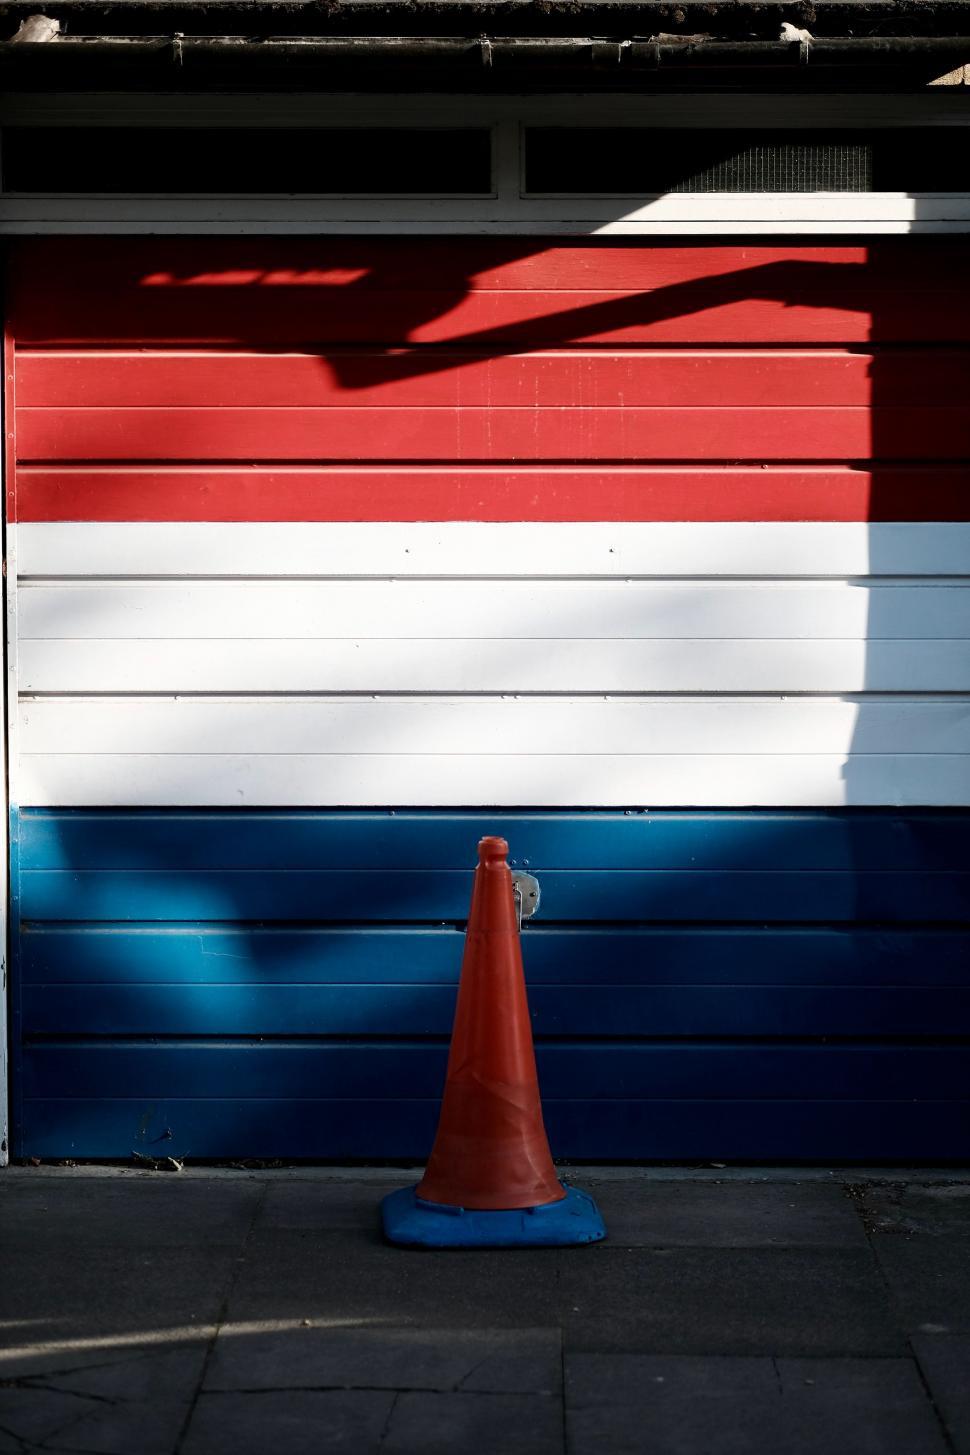 Free Image of Red White and Blue Fire Hydrant Next to a Garage 